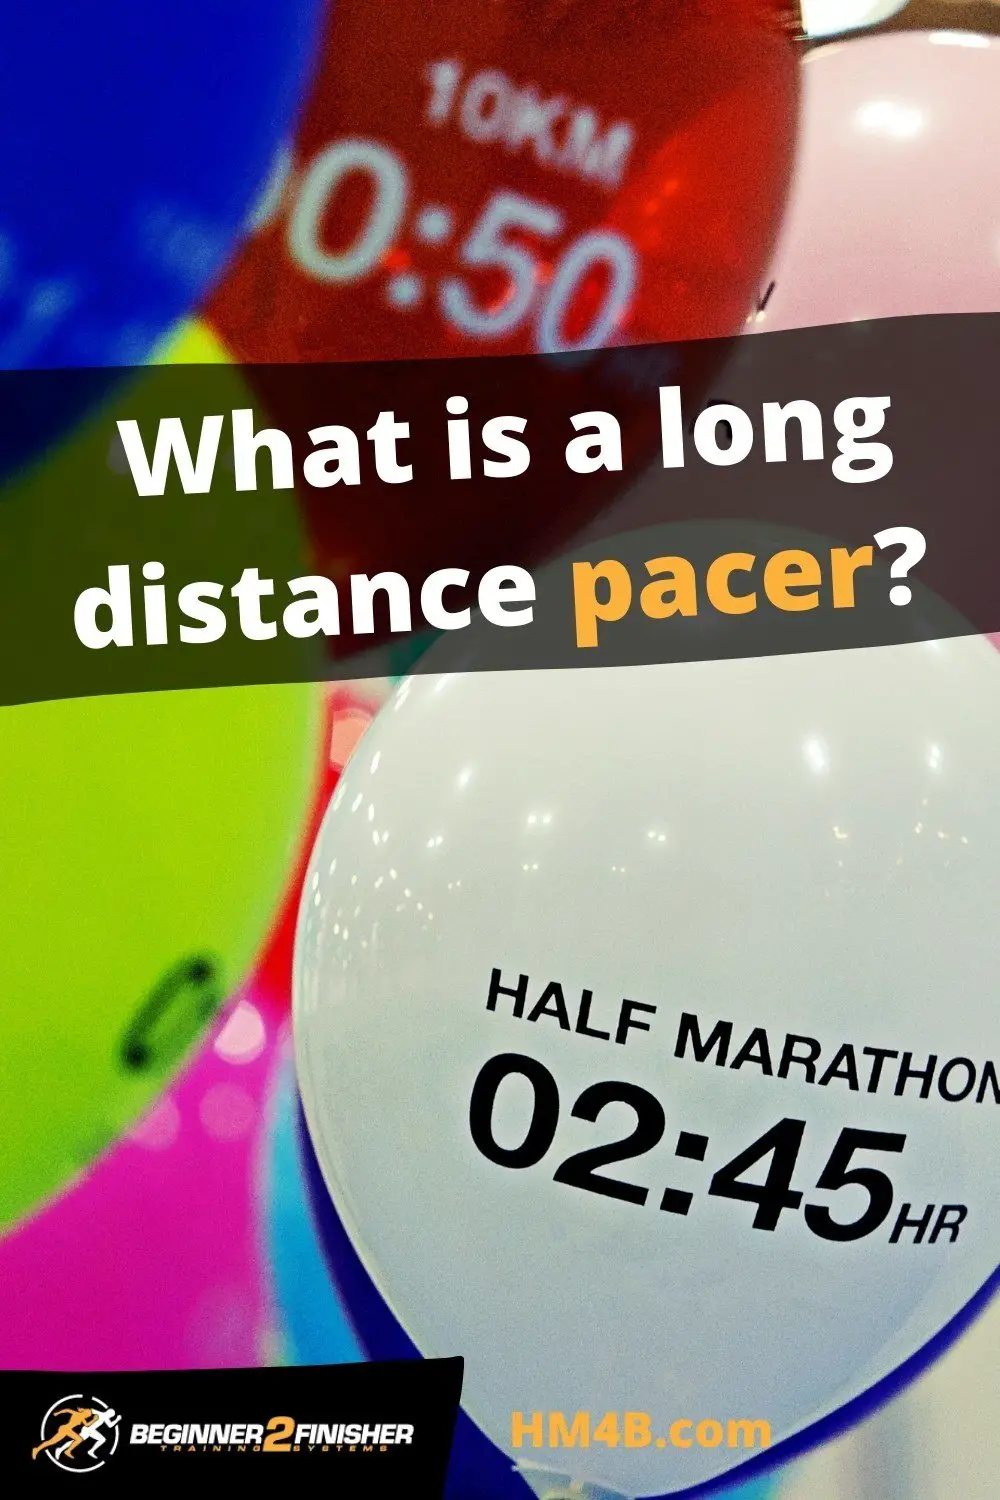 What is a Pacer in Running?